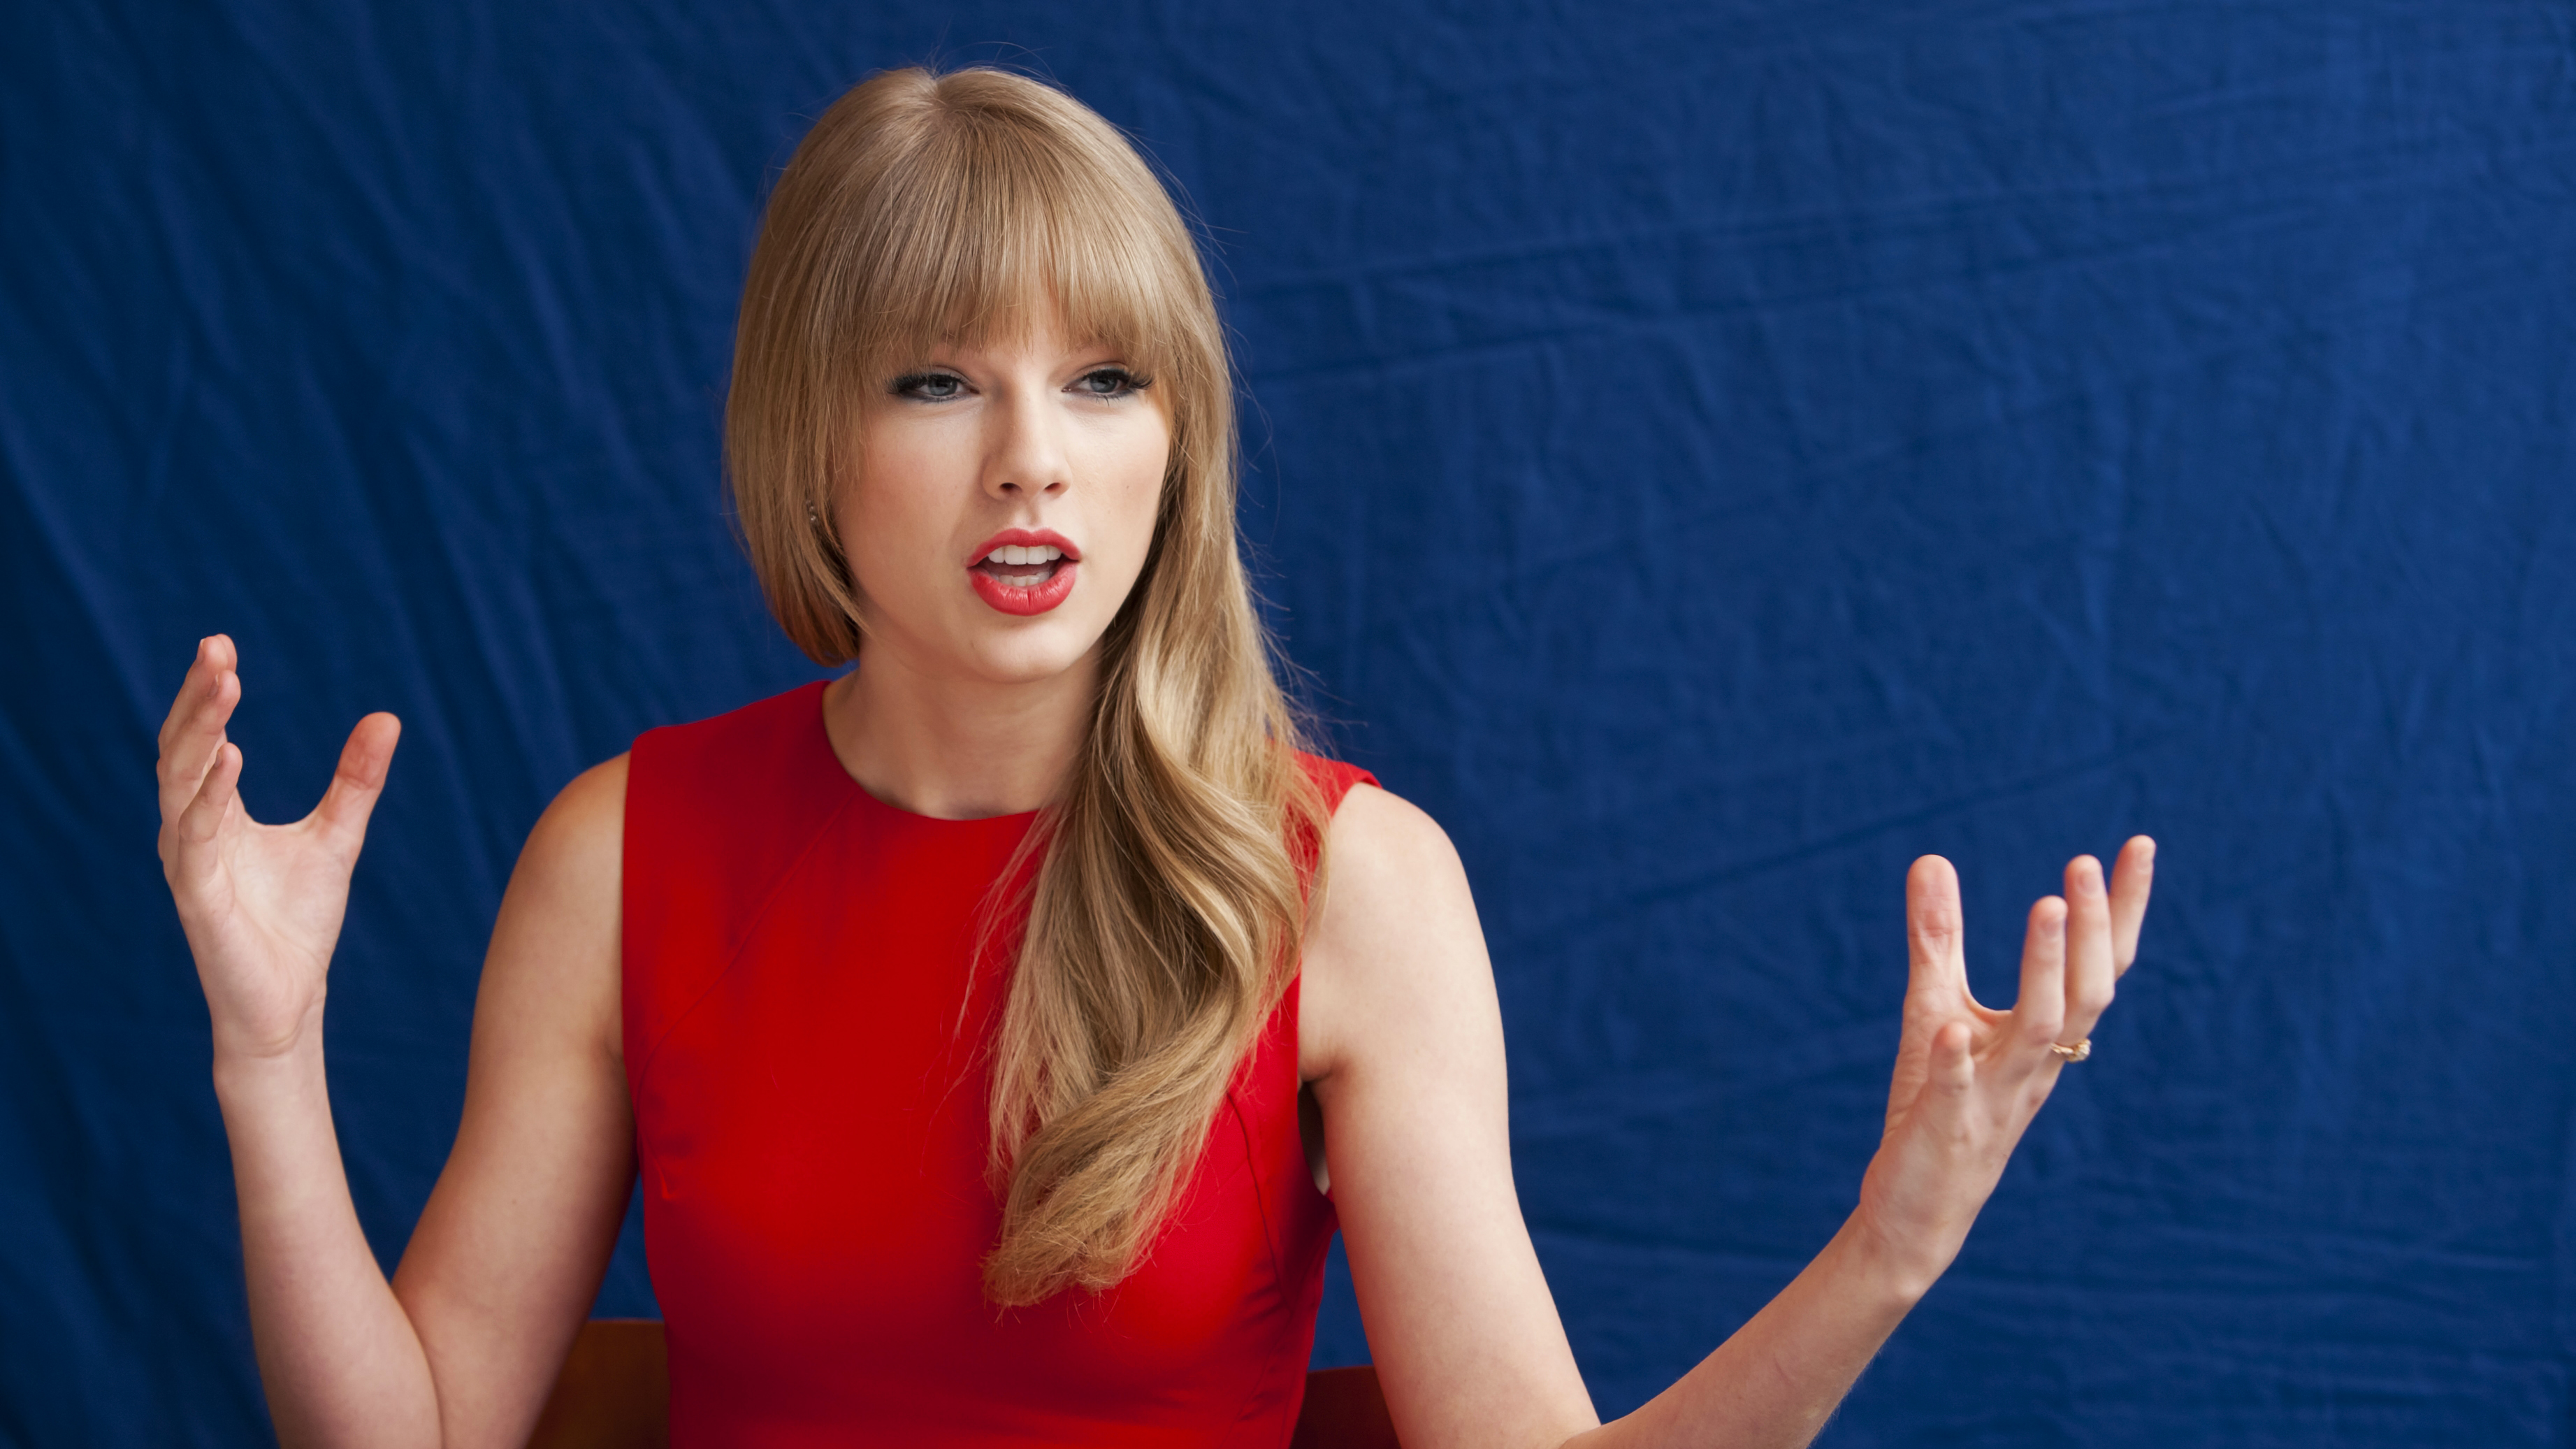 People 3686x2073 Taylor Swift singer women blonde dress hand gesture arms up red dress blue background open mouth fringe hair red lipstick pale celebrity red clothing looking away makeup simple background American women